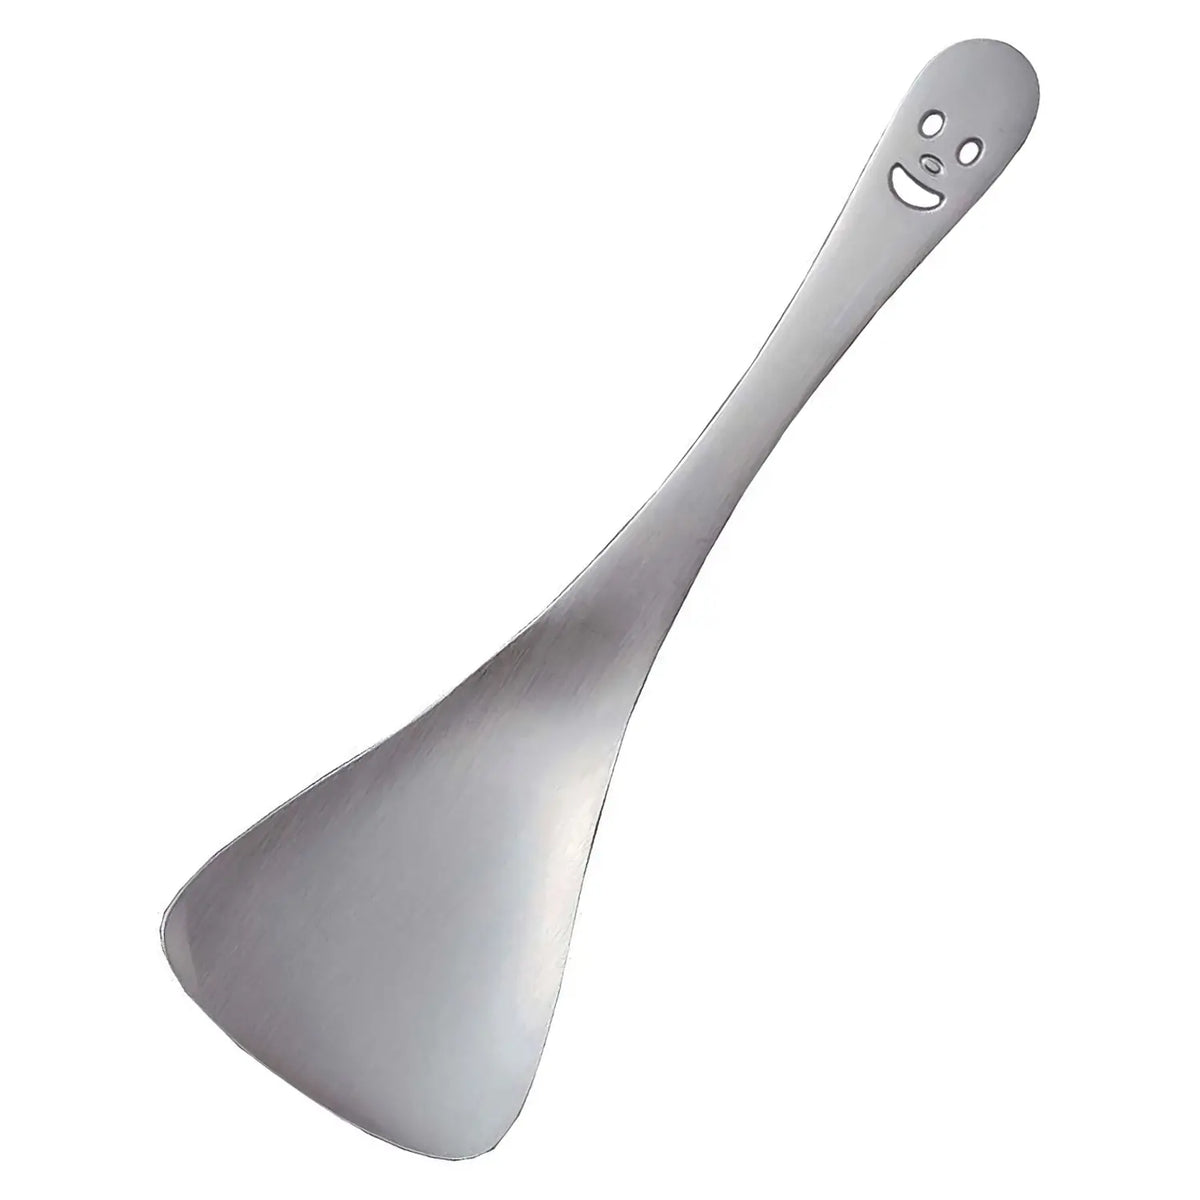 Wada Corporation Nico Stainless Steel Serving Spoon 6.5cm